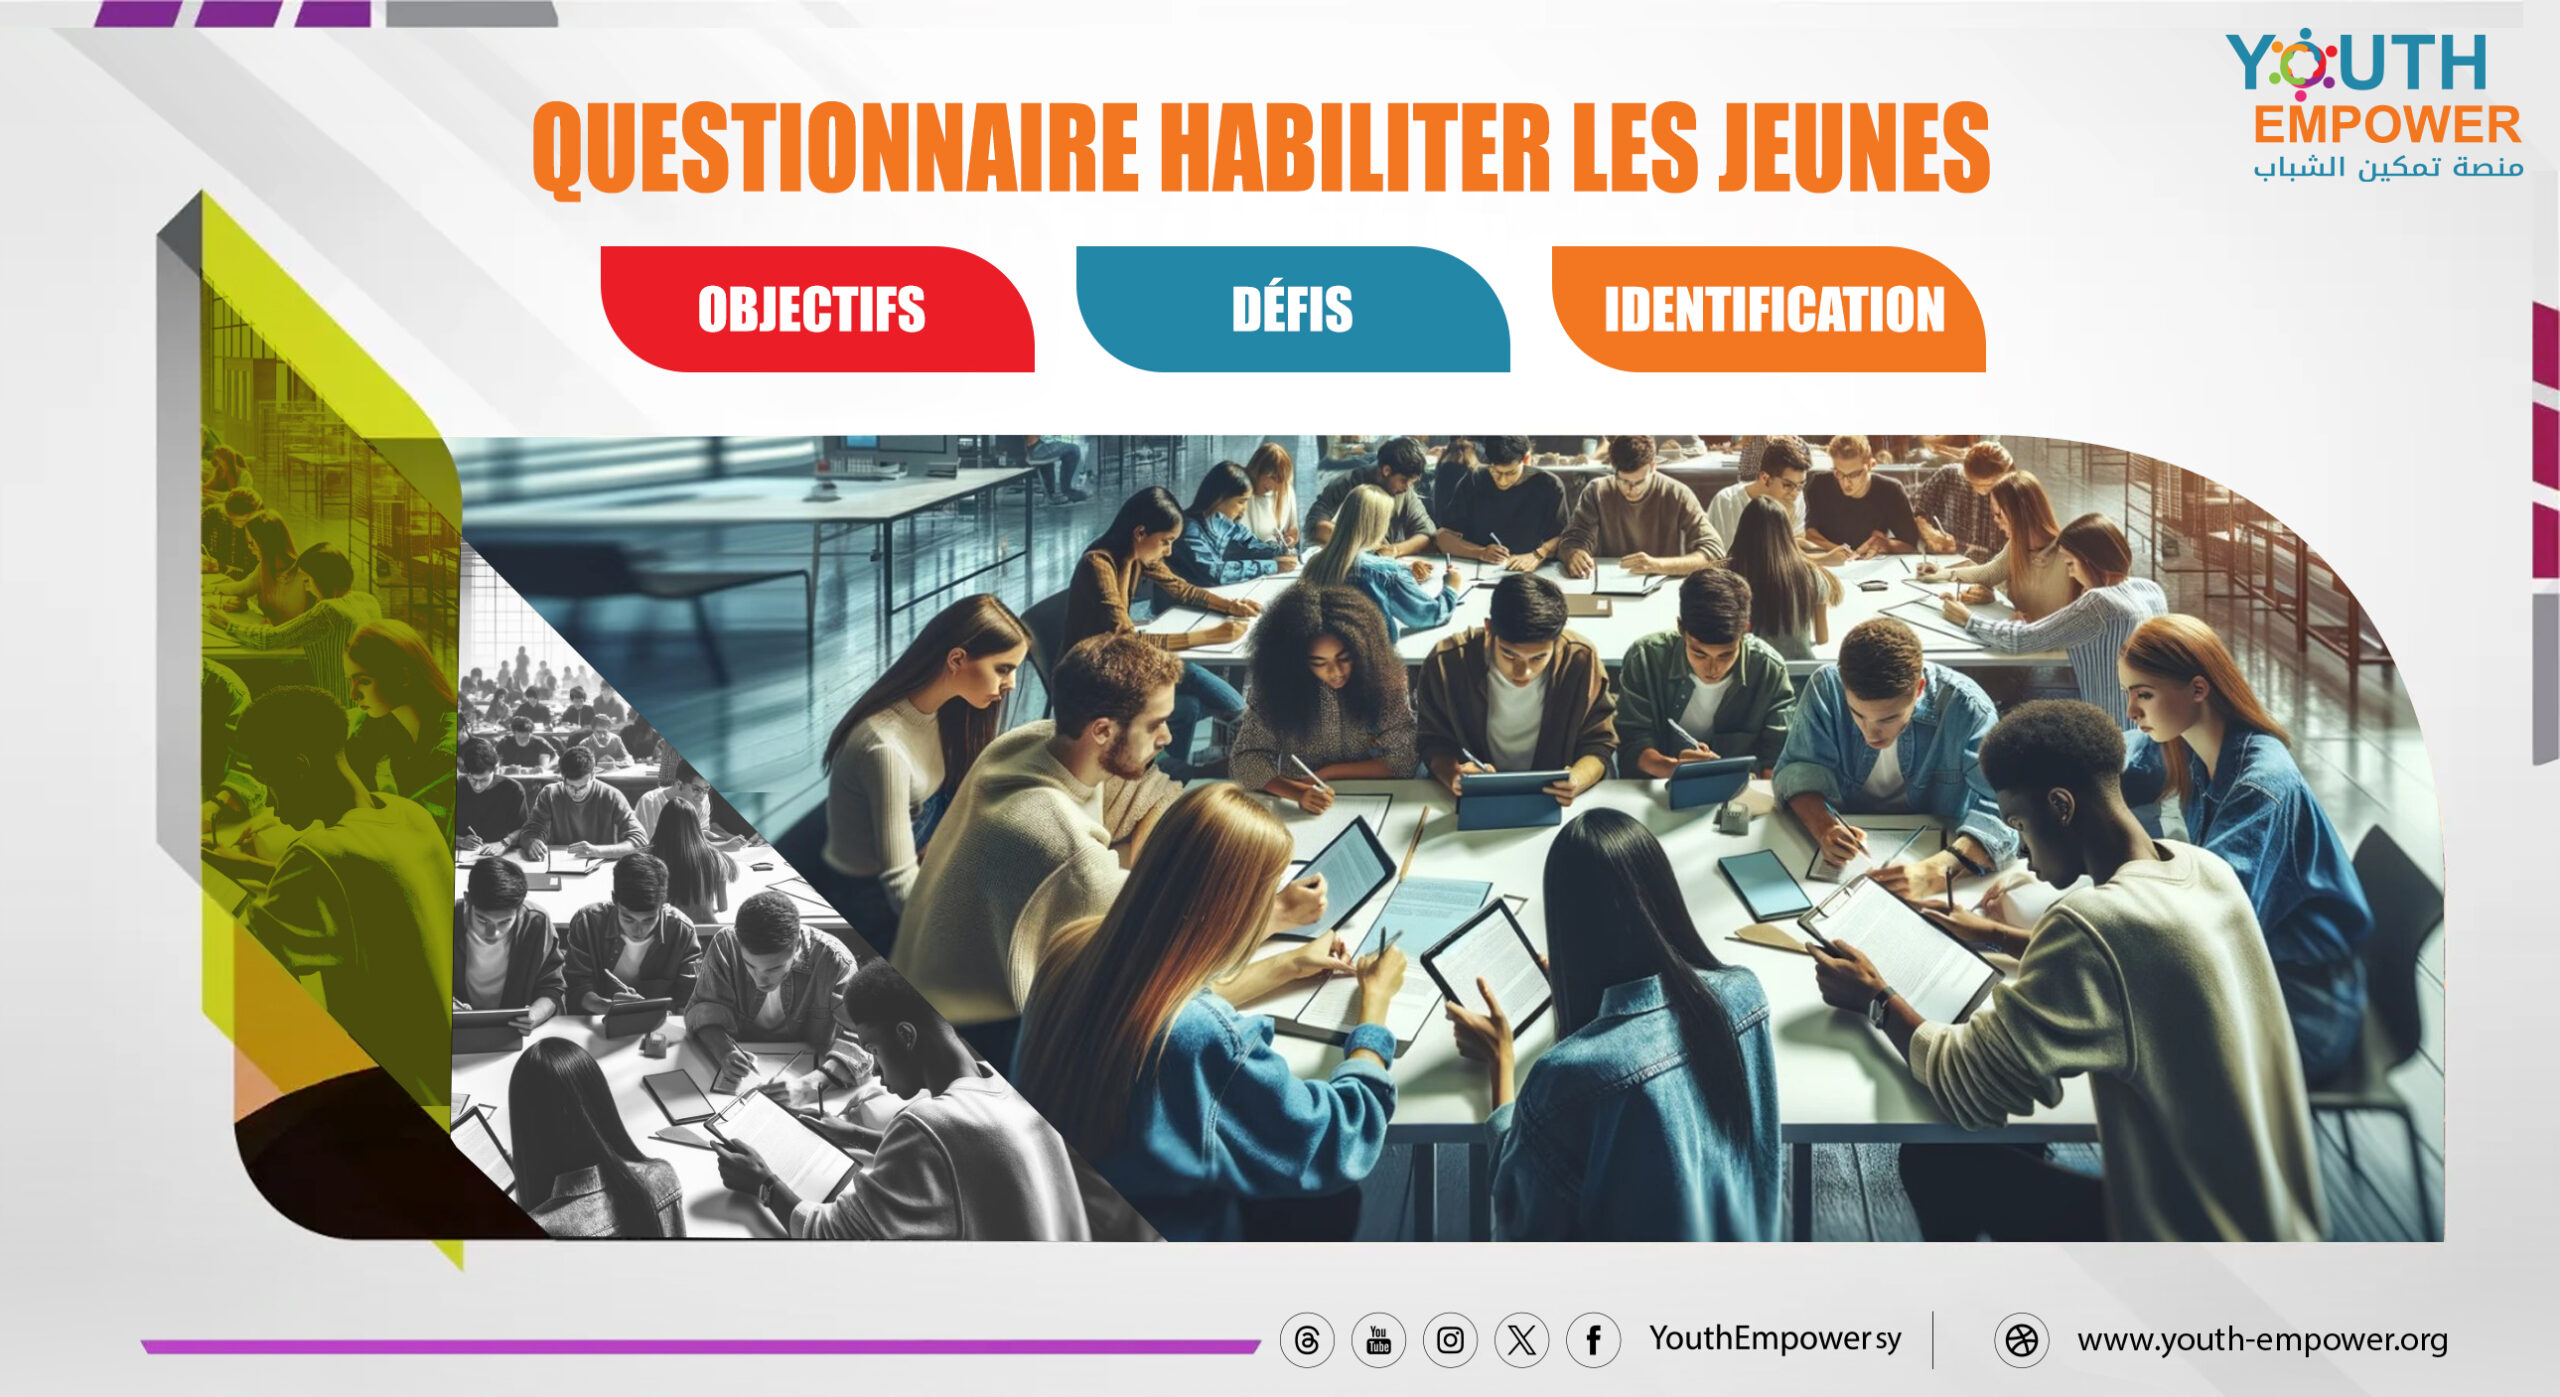 You are currently viewing Questionnaire Habiliter les jeunes – Identification – Défis – Objectifs